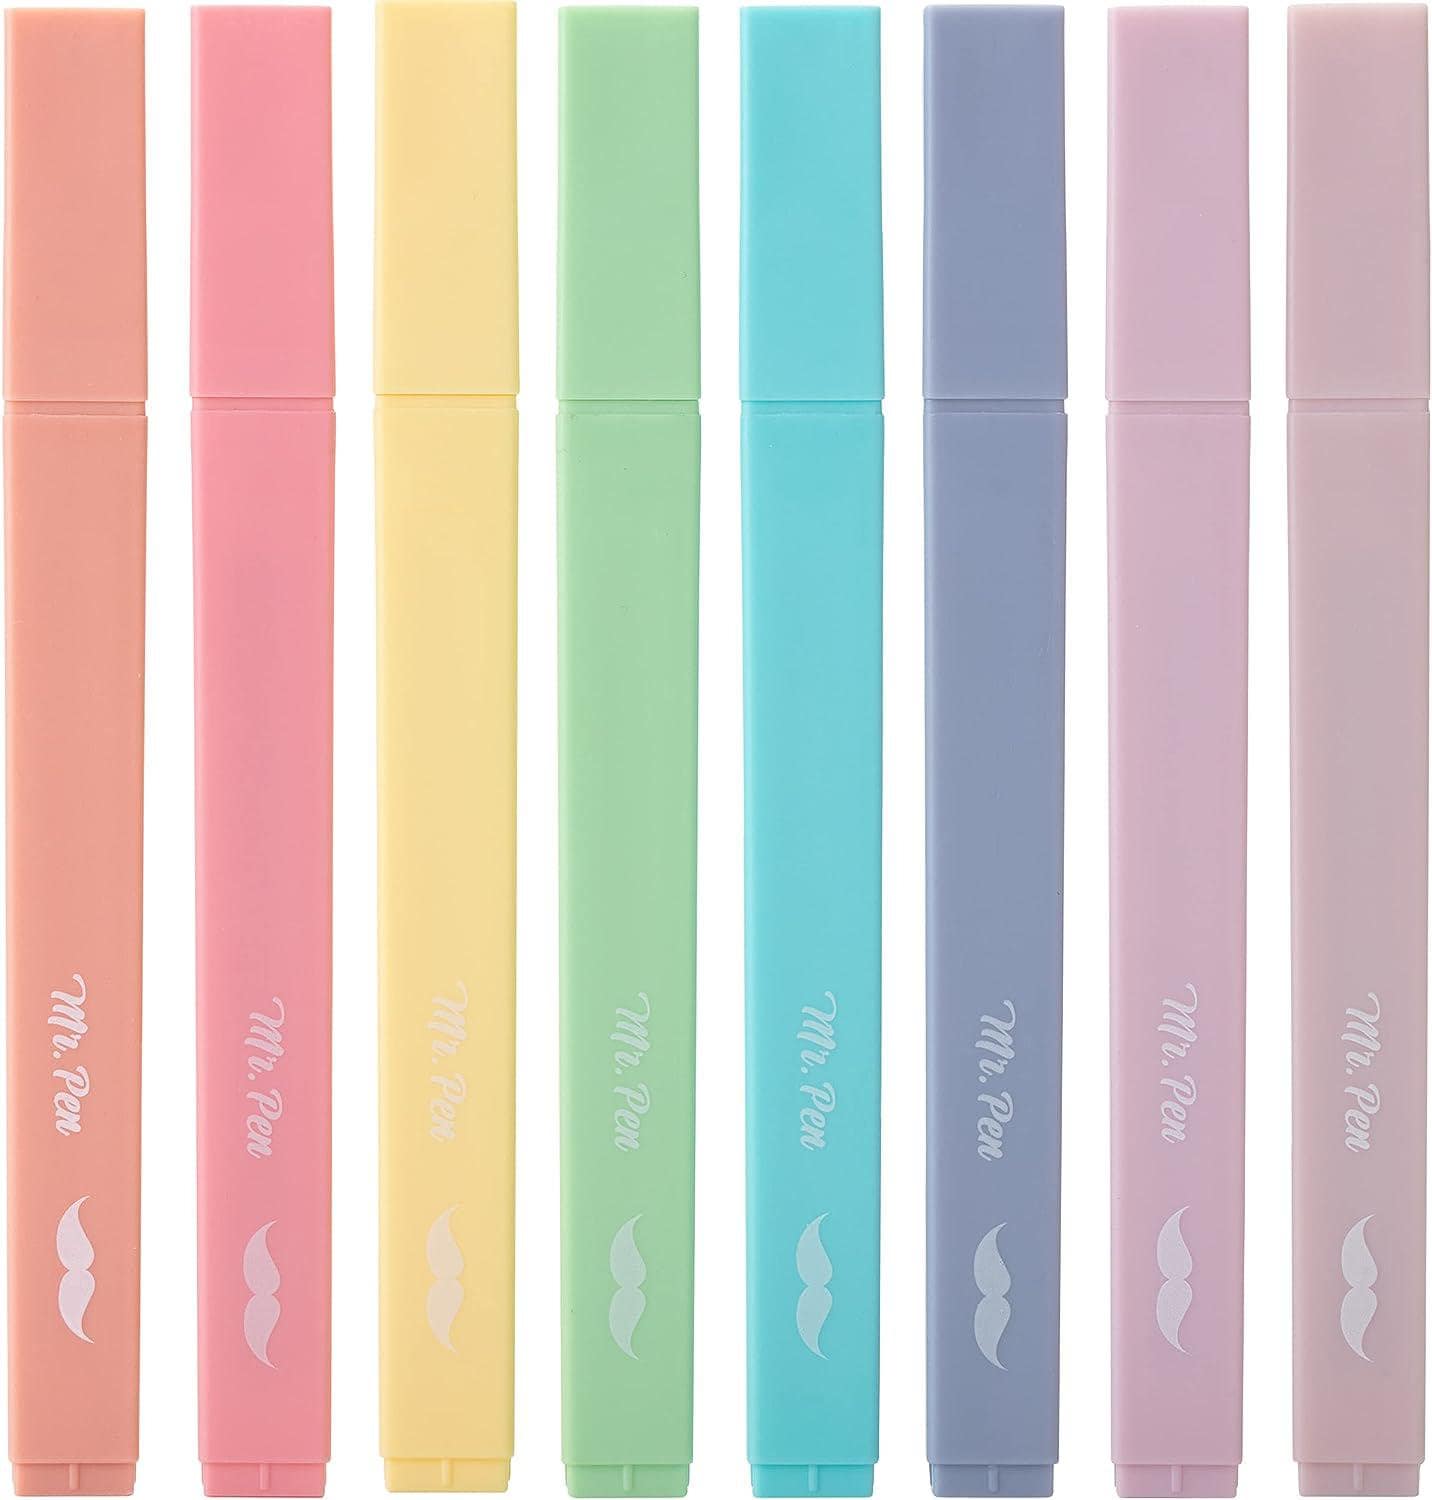 Mr. Pen- Aesthetic Highlighters, 8 Pcs, Chisel Tip, Muted Pastel